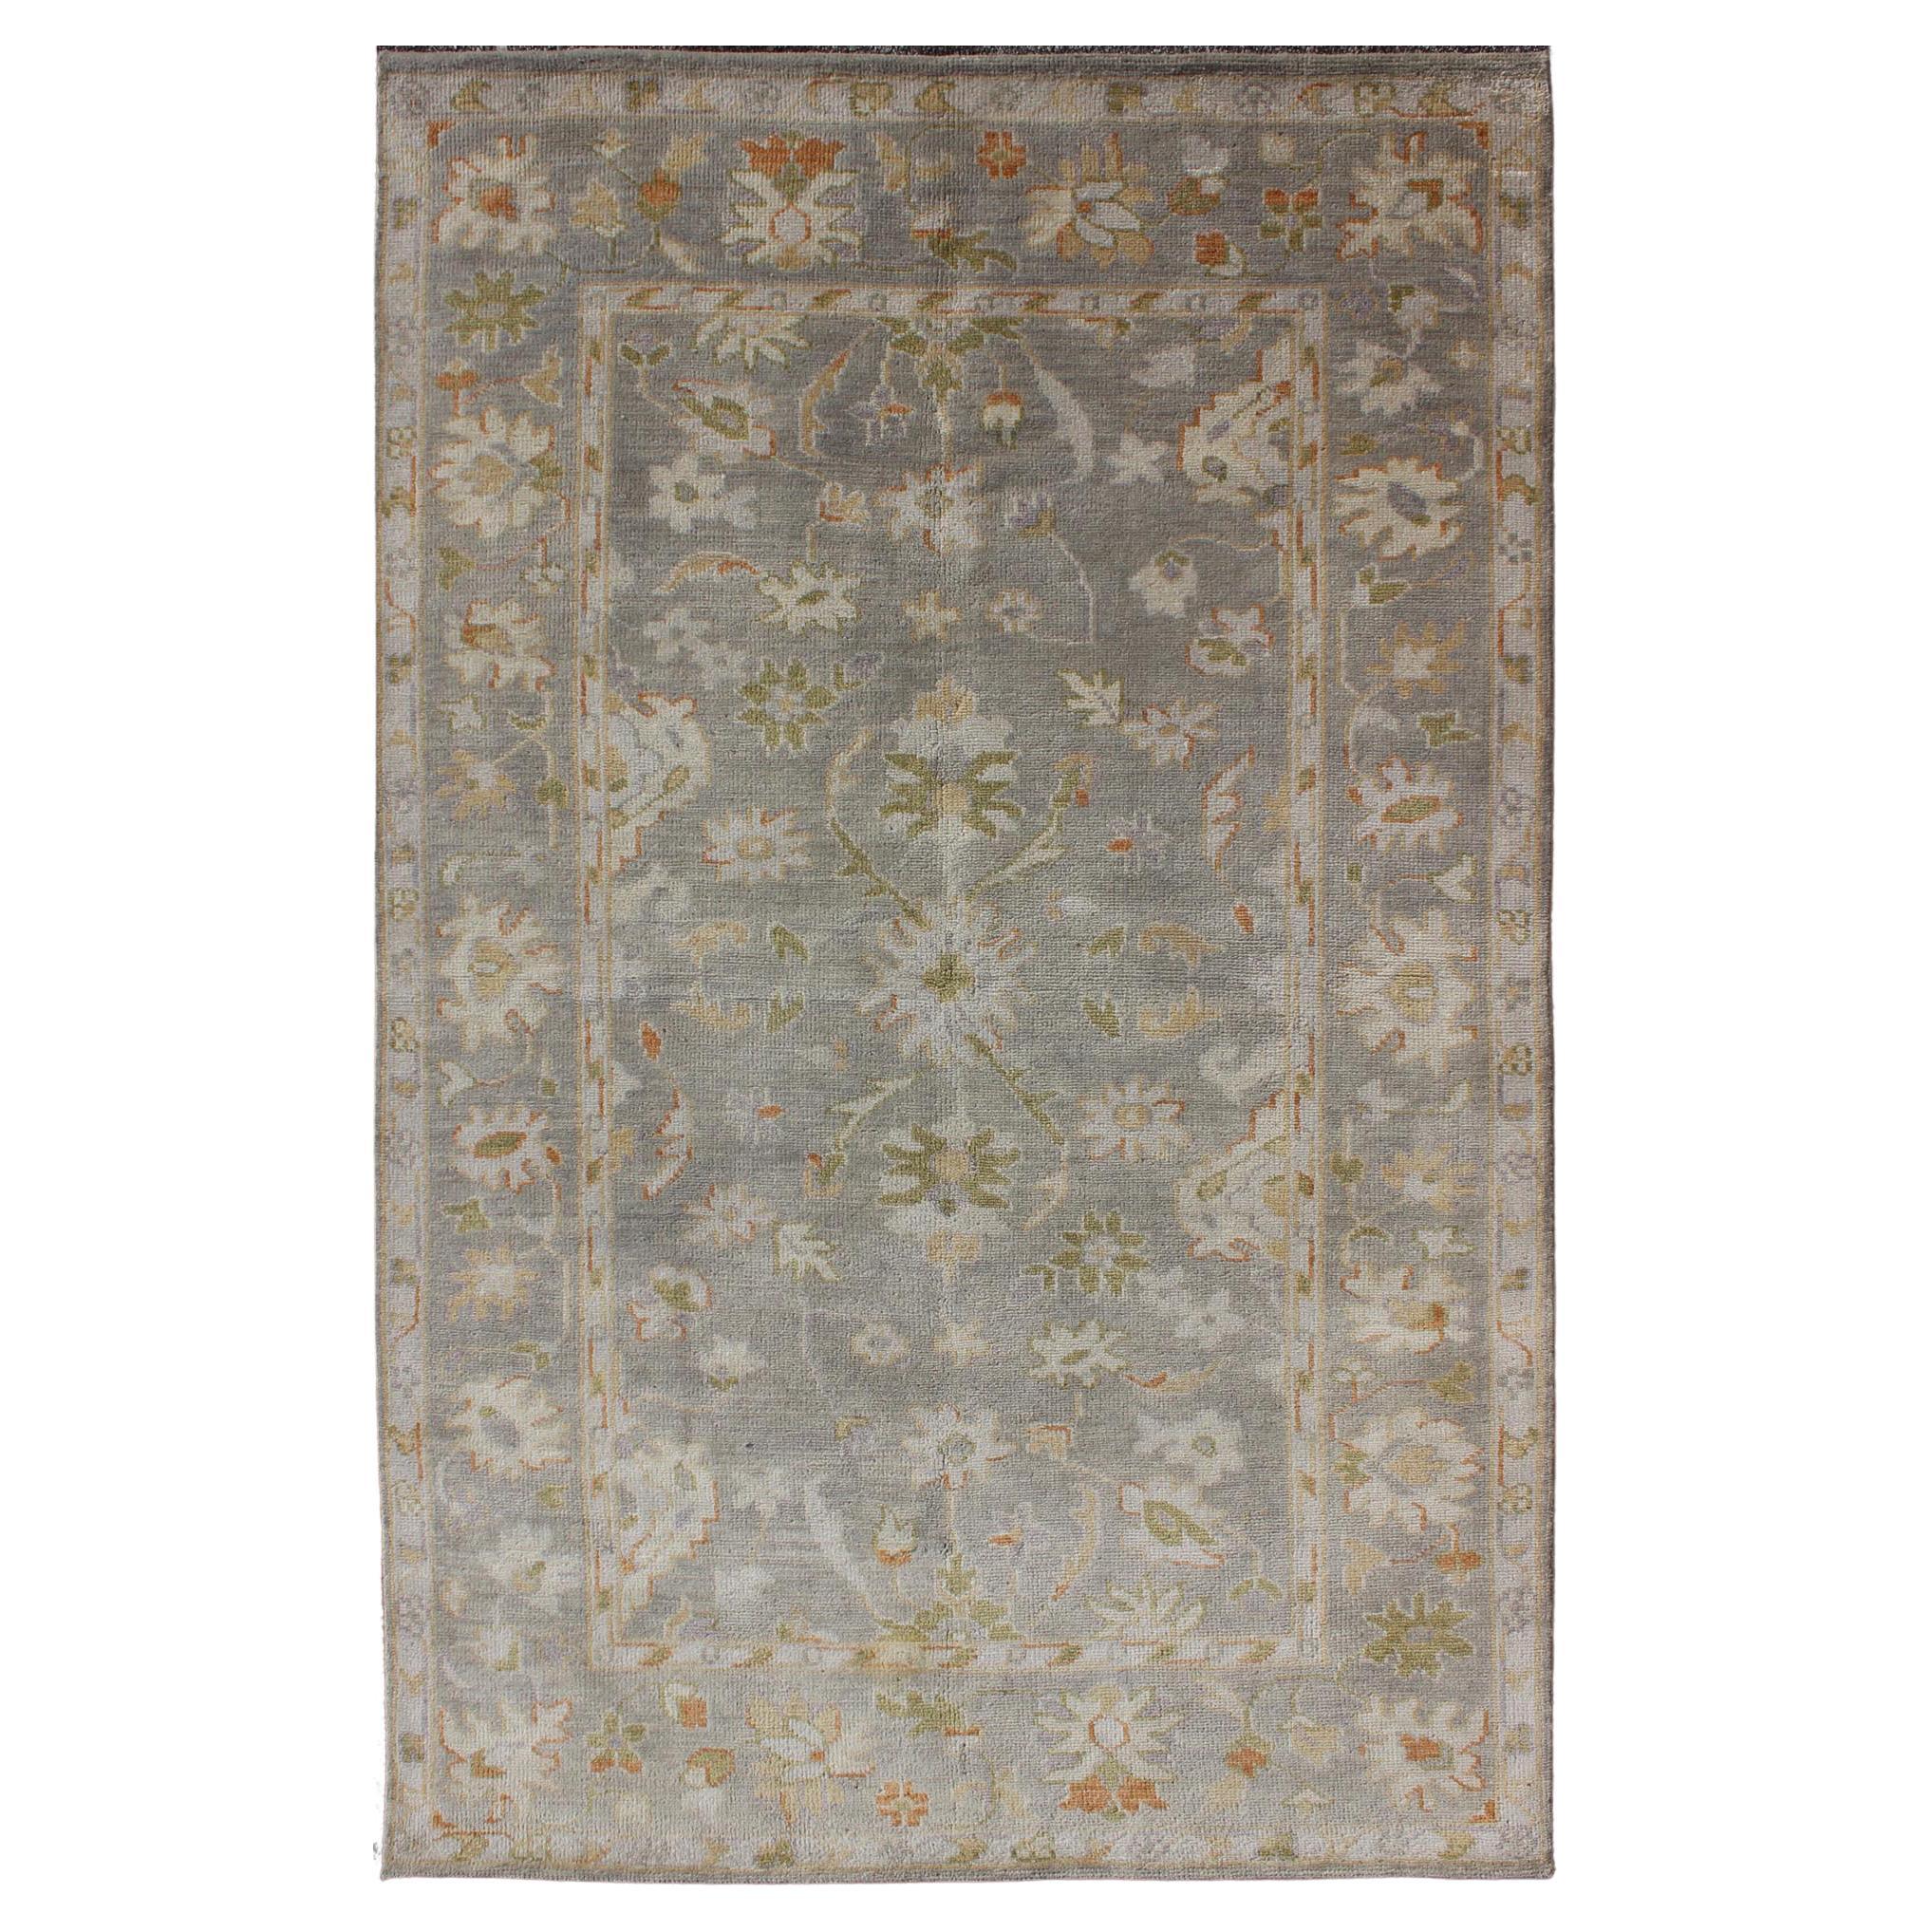 Oushak Rug with Floral Design in Gray Background, Chartreus Green, Cream, Red